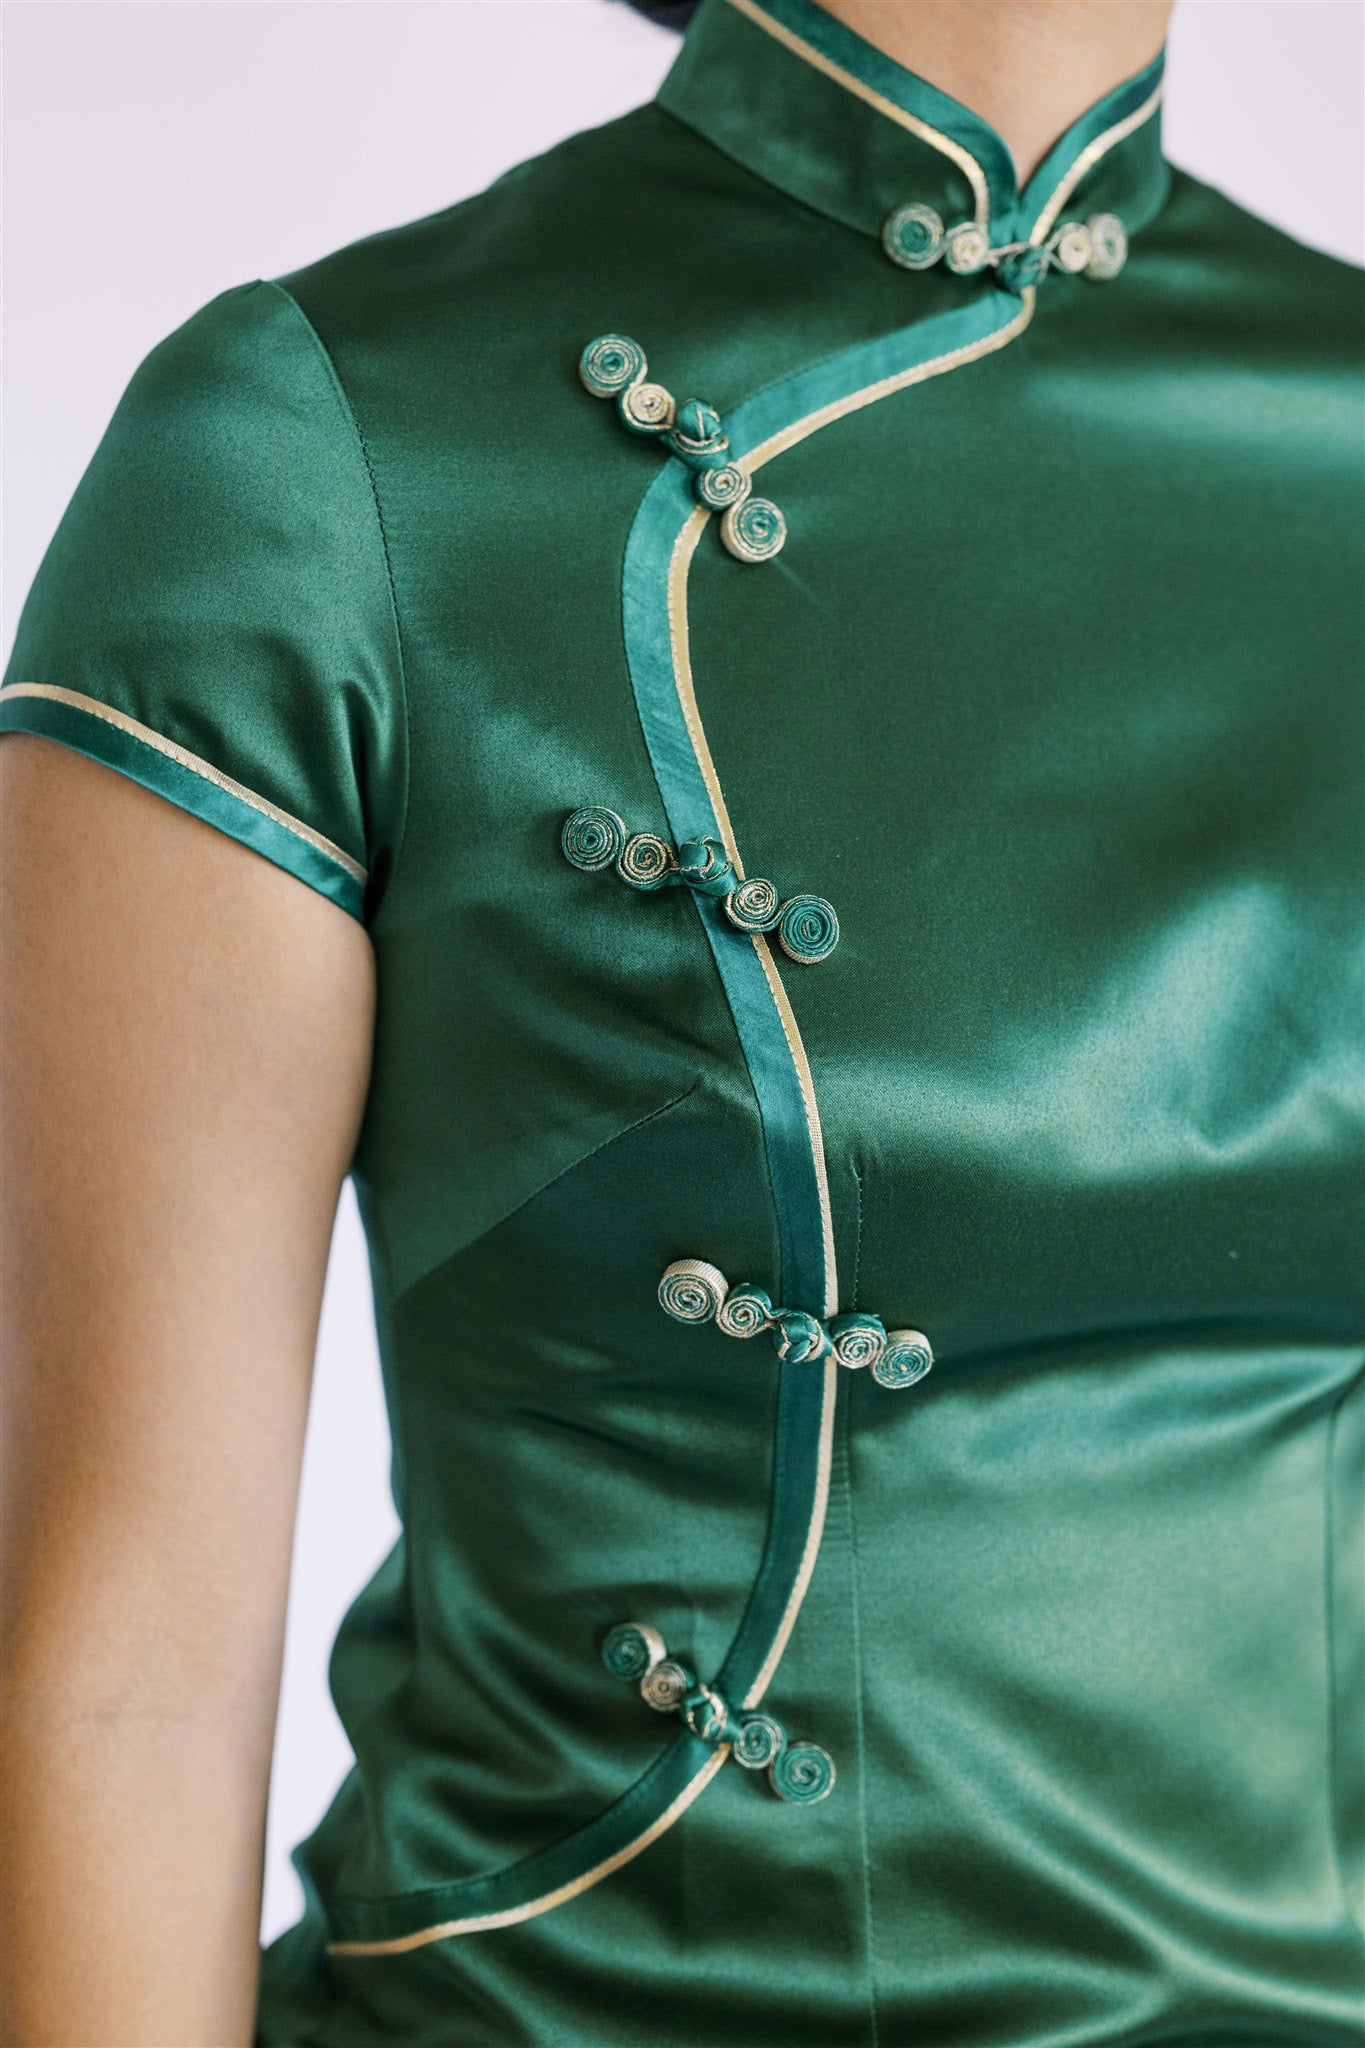 Jinza Oriental Couture Mother of Bride Qipao Qipao for Mother | Autumnal Equinox Hand-Dyed Emerald Green with Gold